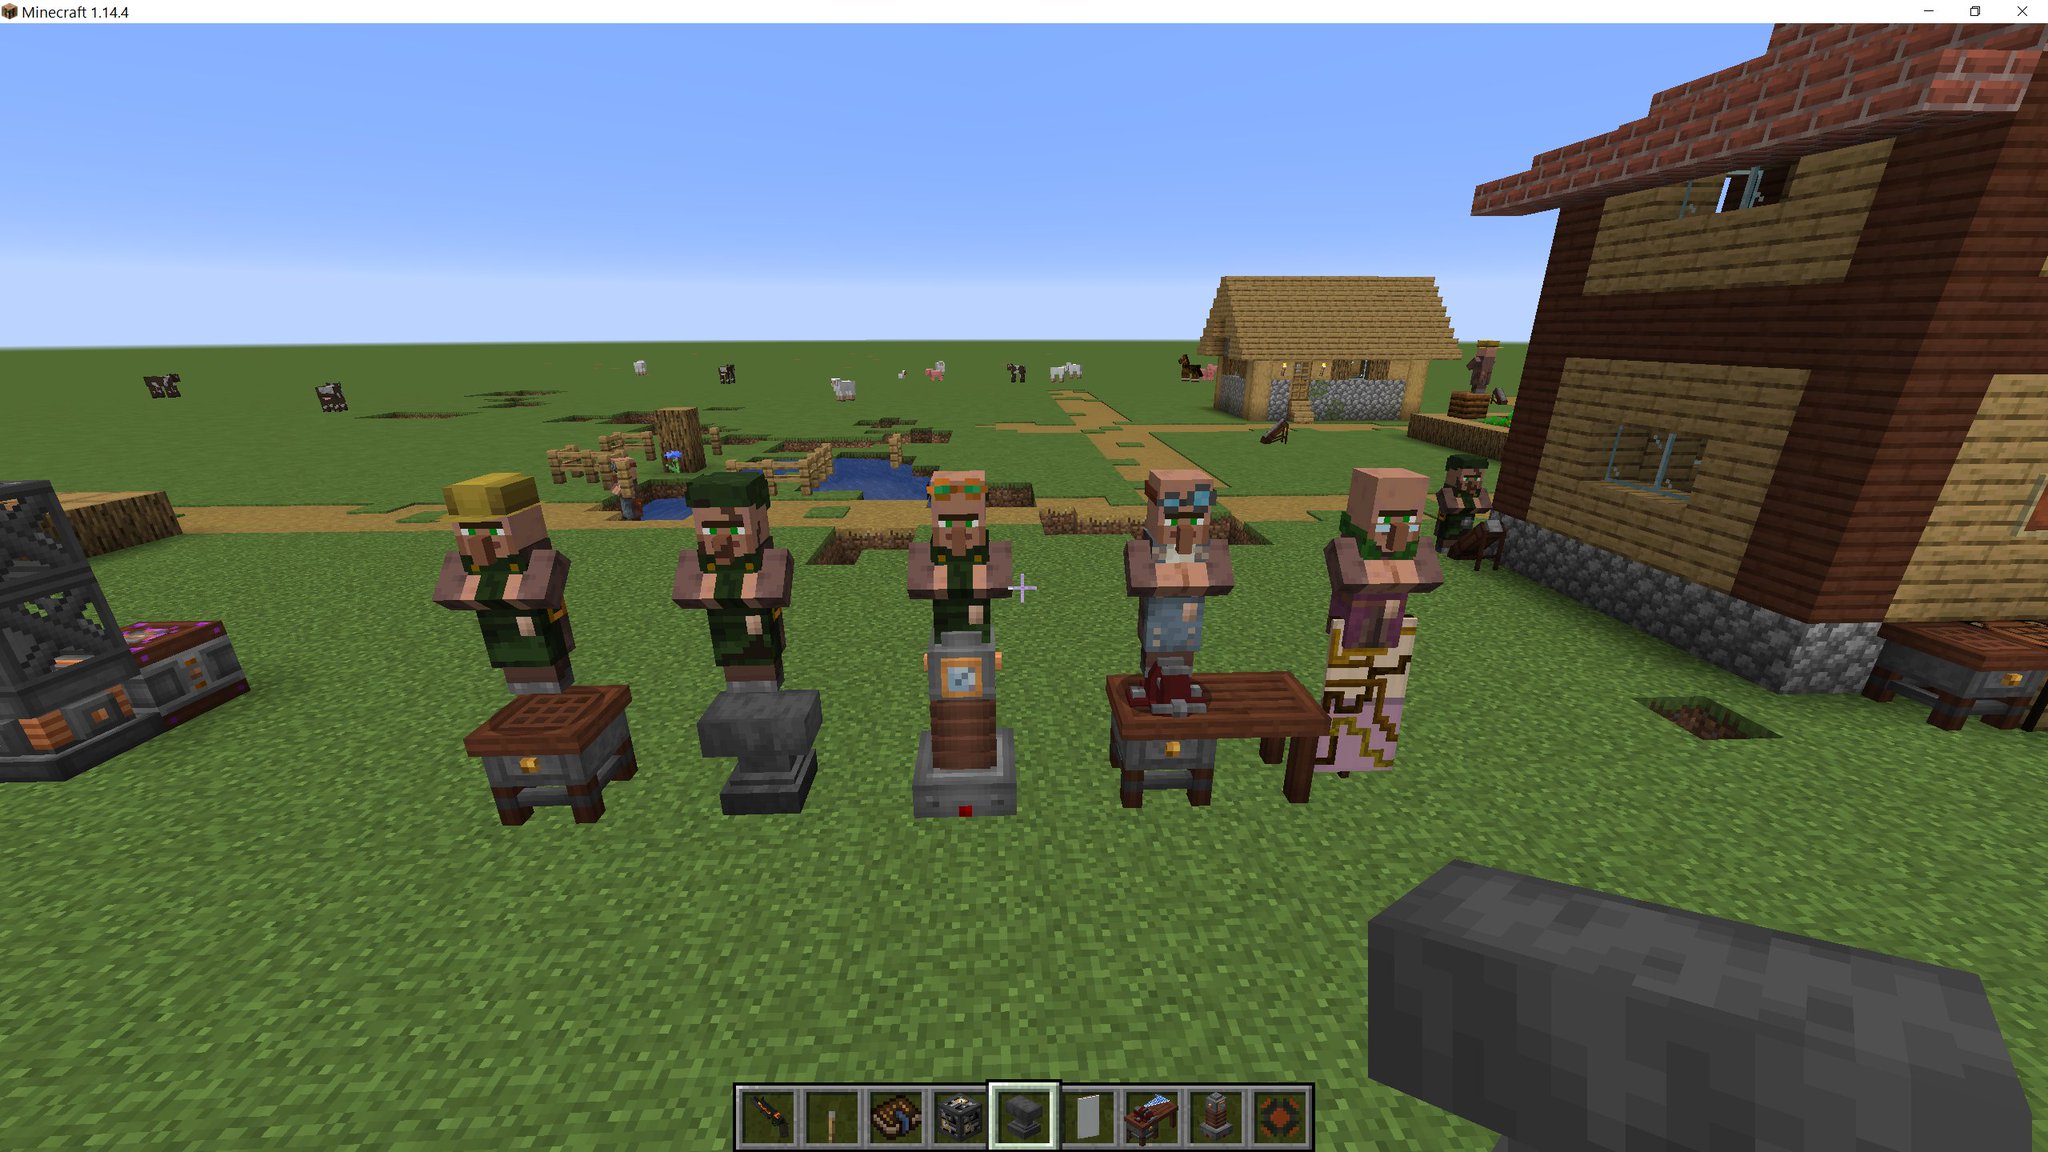 Blusunrize There We Go All 5 Of Ie S Villagers Have Workstations Now D